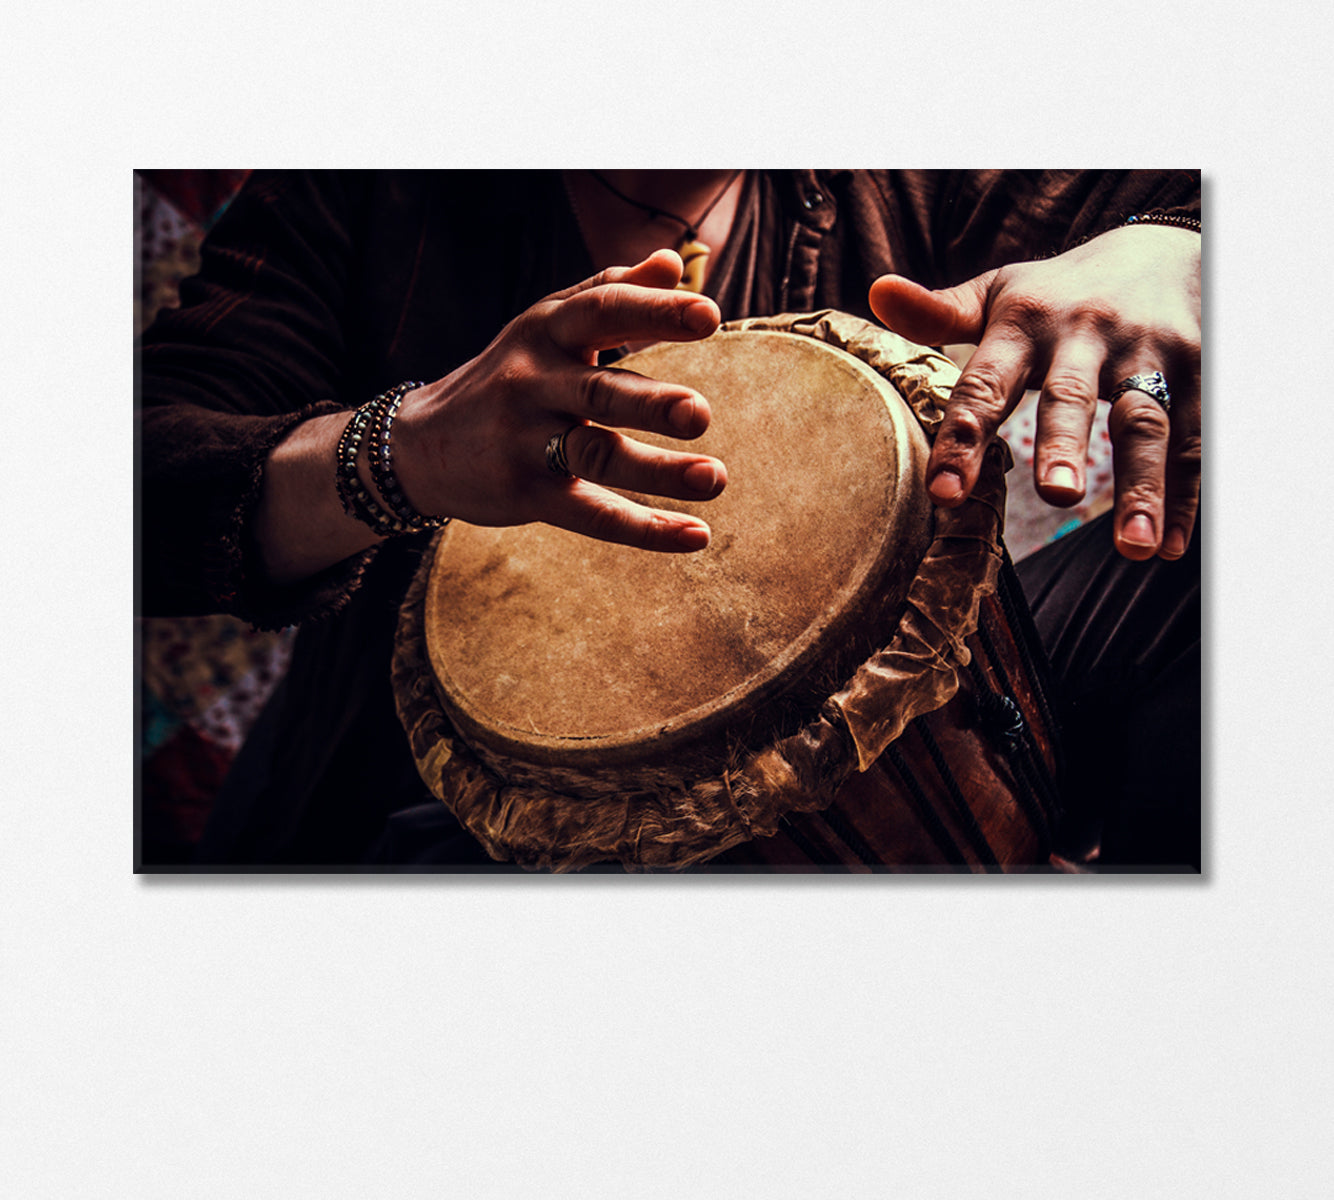 Man Playing the Djembe African Drum Canvas Print-Canvas Print-CetArt-1 Panel-24x16 inches-CetArt